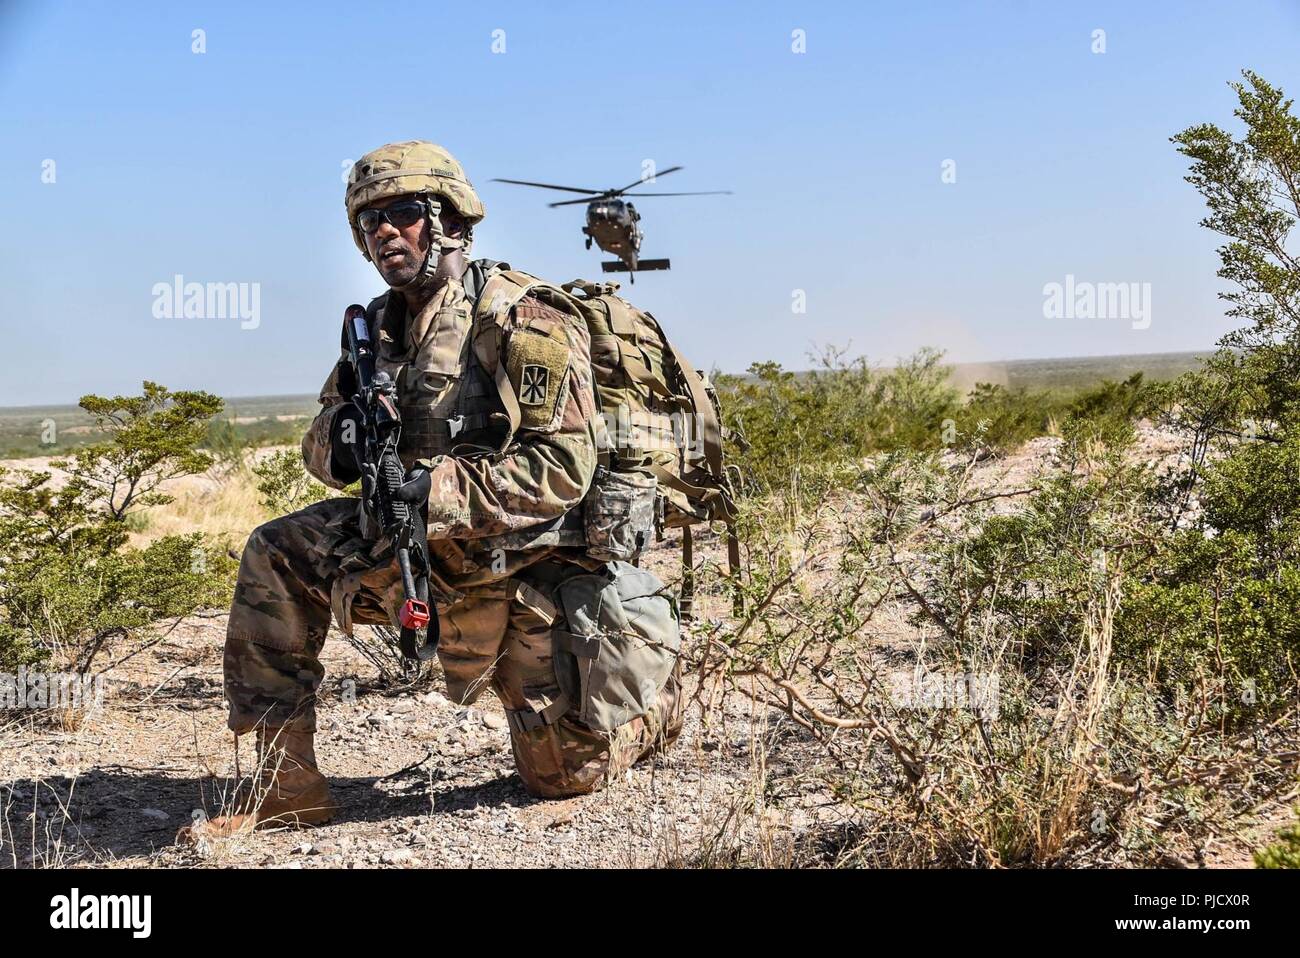 After the nine line MEDEVAC was called up, Spc. Tristian McFadden, a petroleum supply specialist from 11th ADA, 1-43 Battalion, Charlie Battery, waited for air support during the rescues mission at Wagali Village July 18, 2018. (By Sgt. La’Shawna Custom, 32d AAMDC Public Affairs NCO) Stock Photo